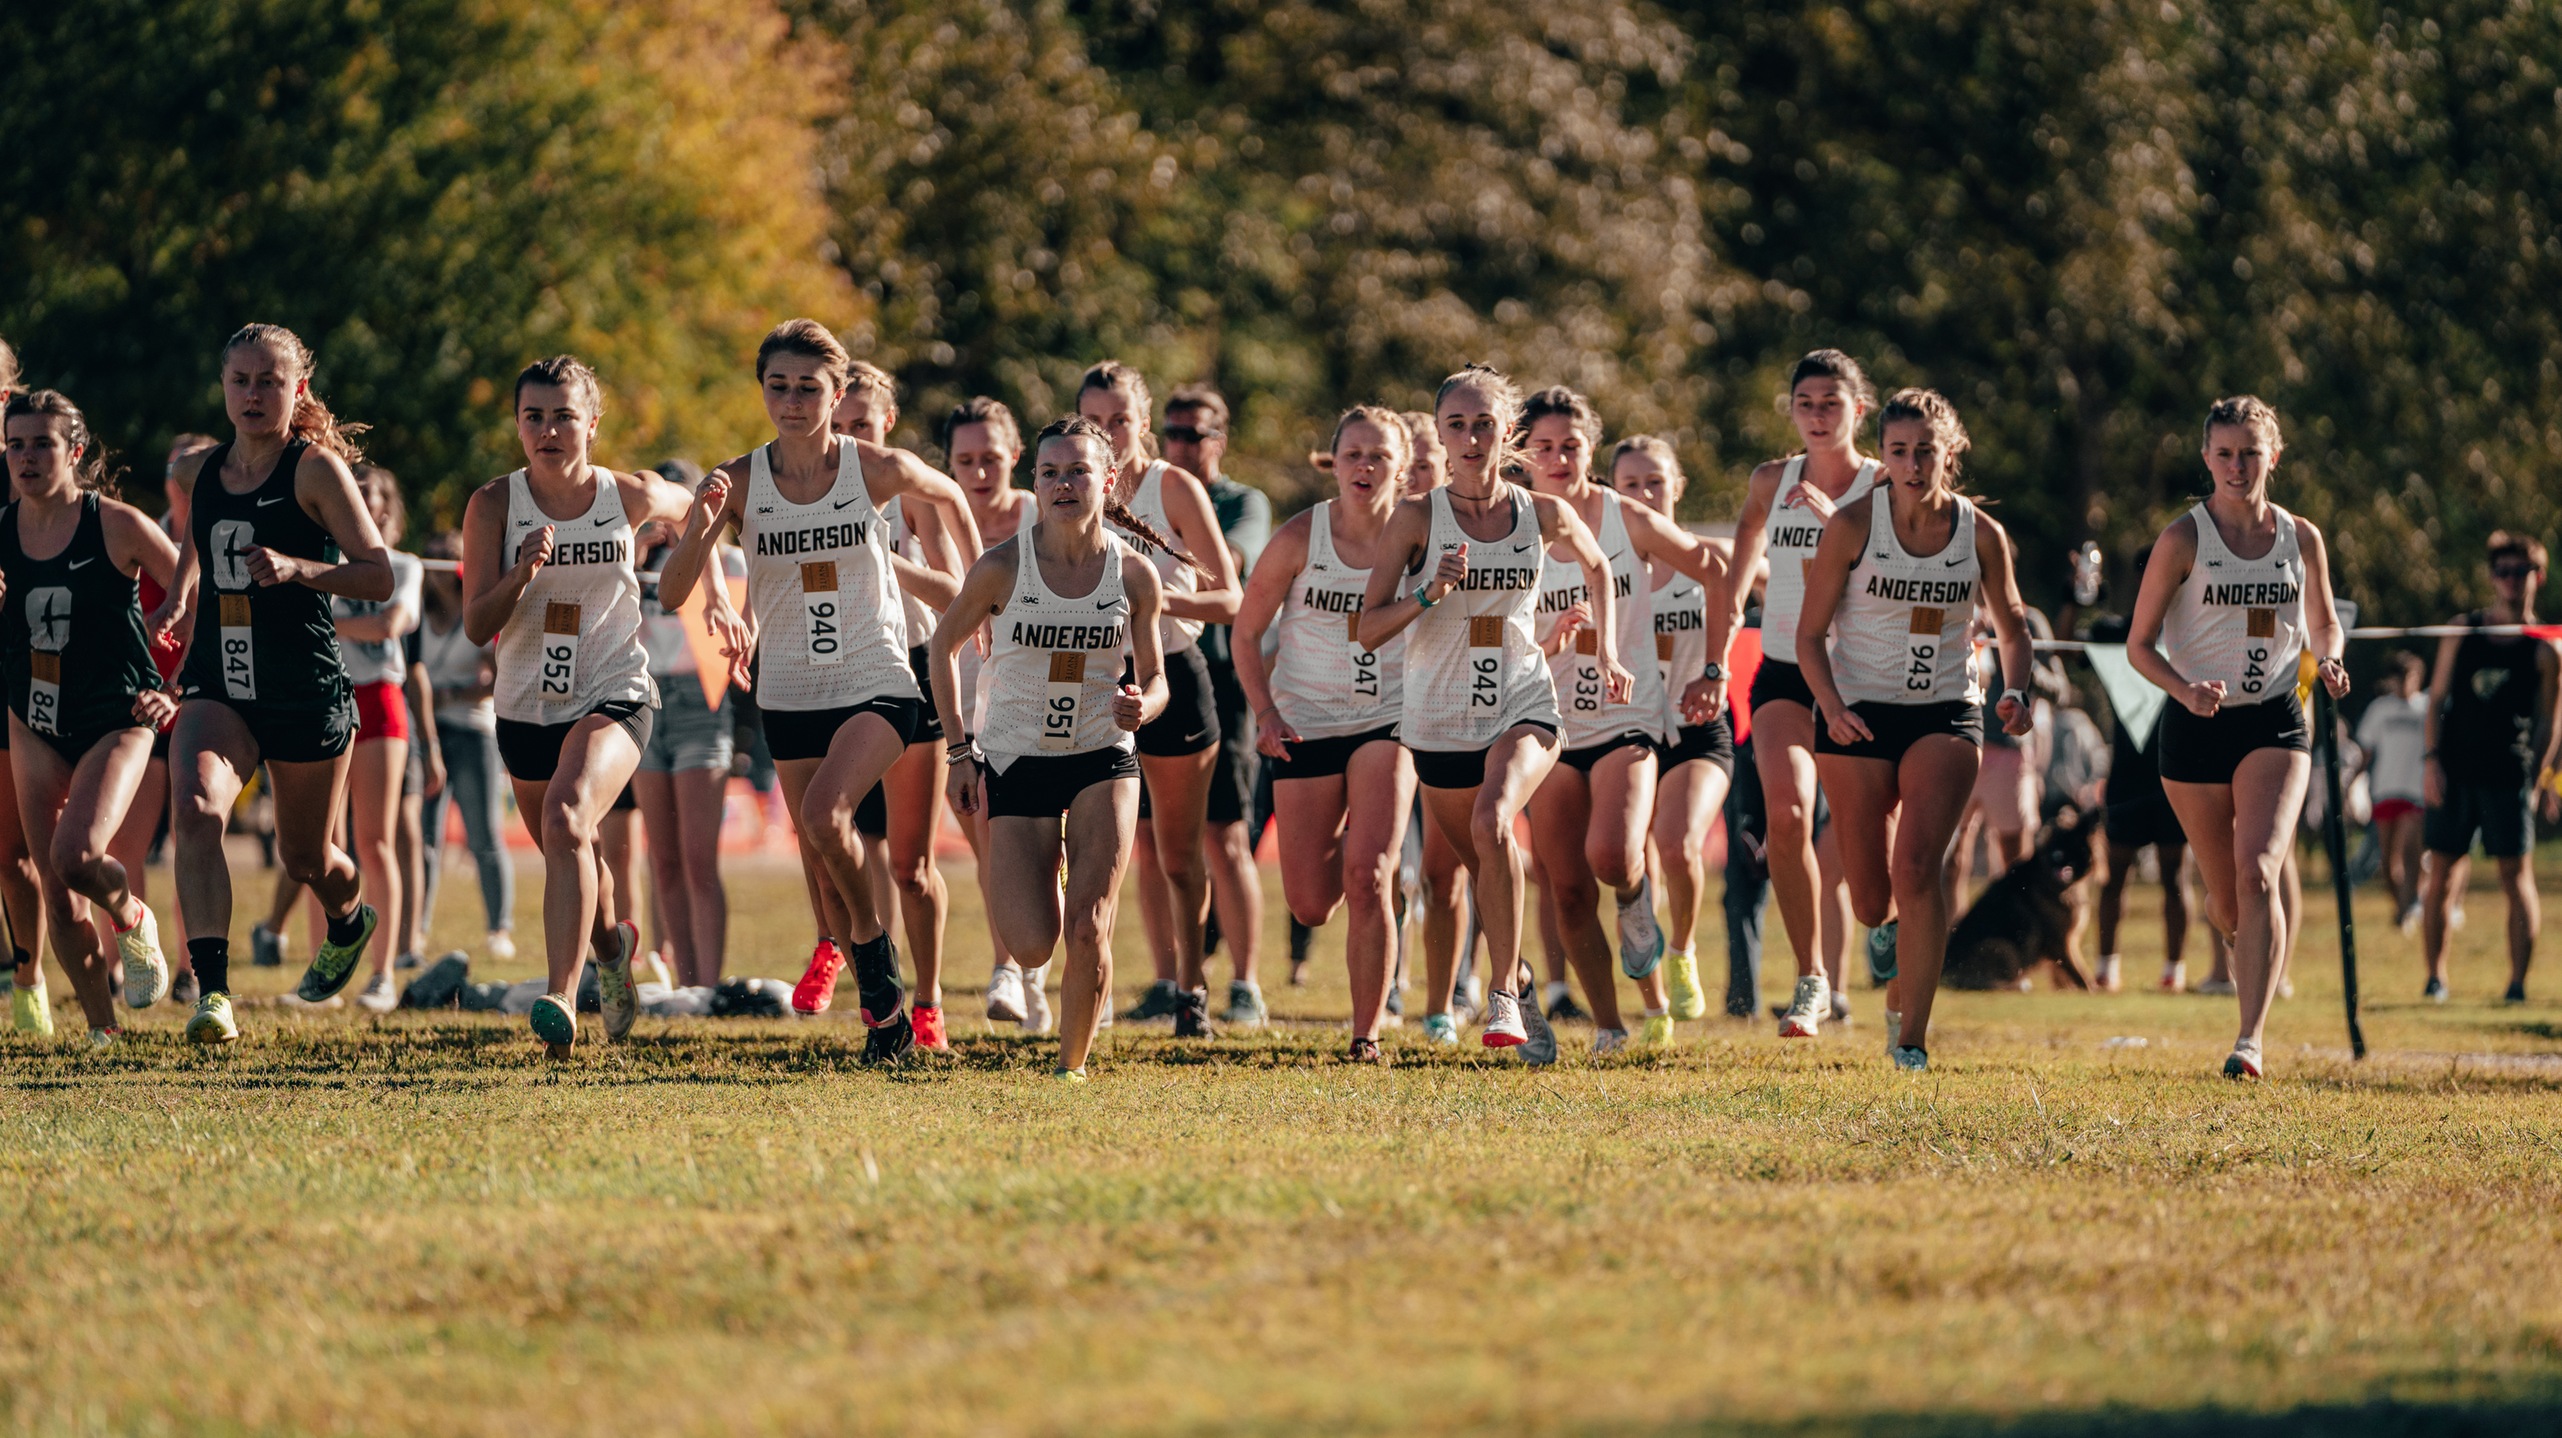 Women's Cross Country Finishes Fifth at Royals XC Challenge